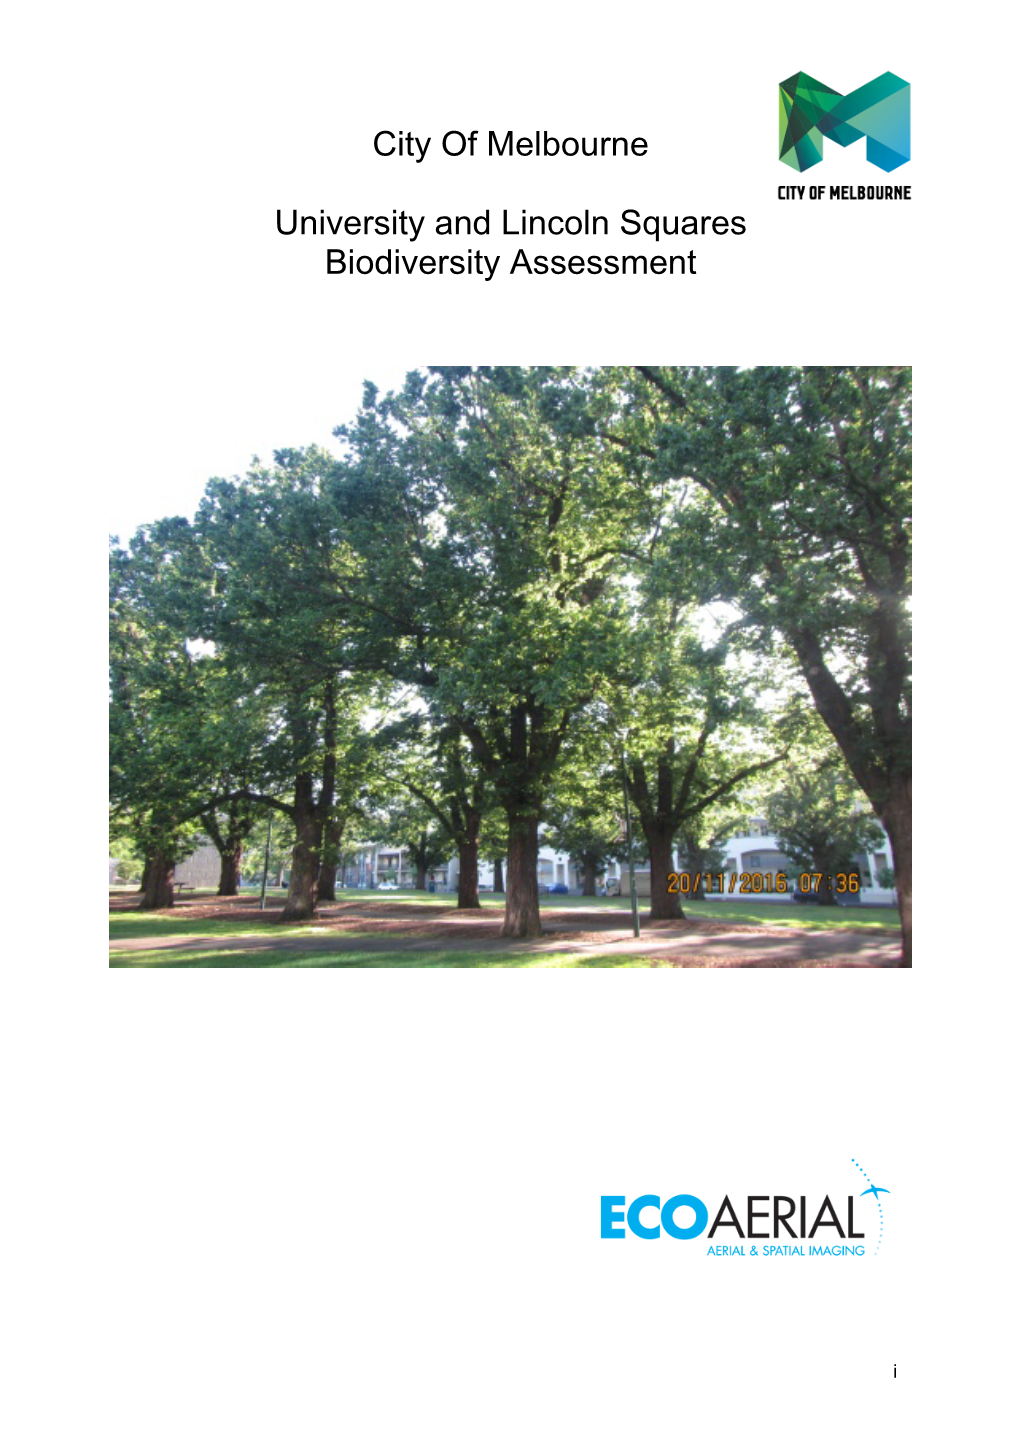 University and Lincoln Square Biodiversity Assessment